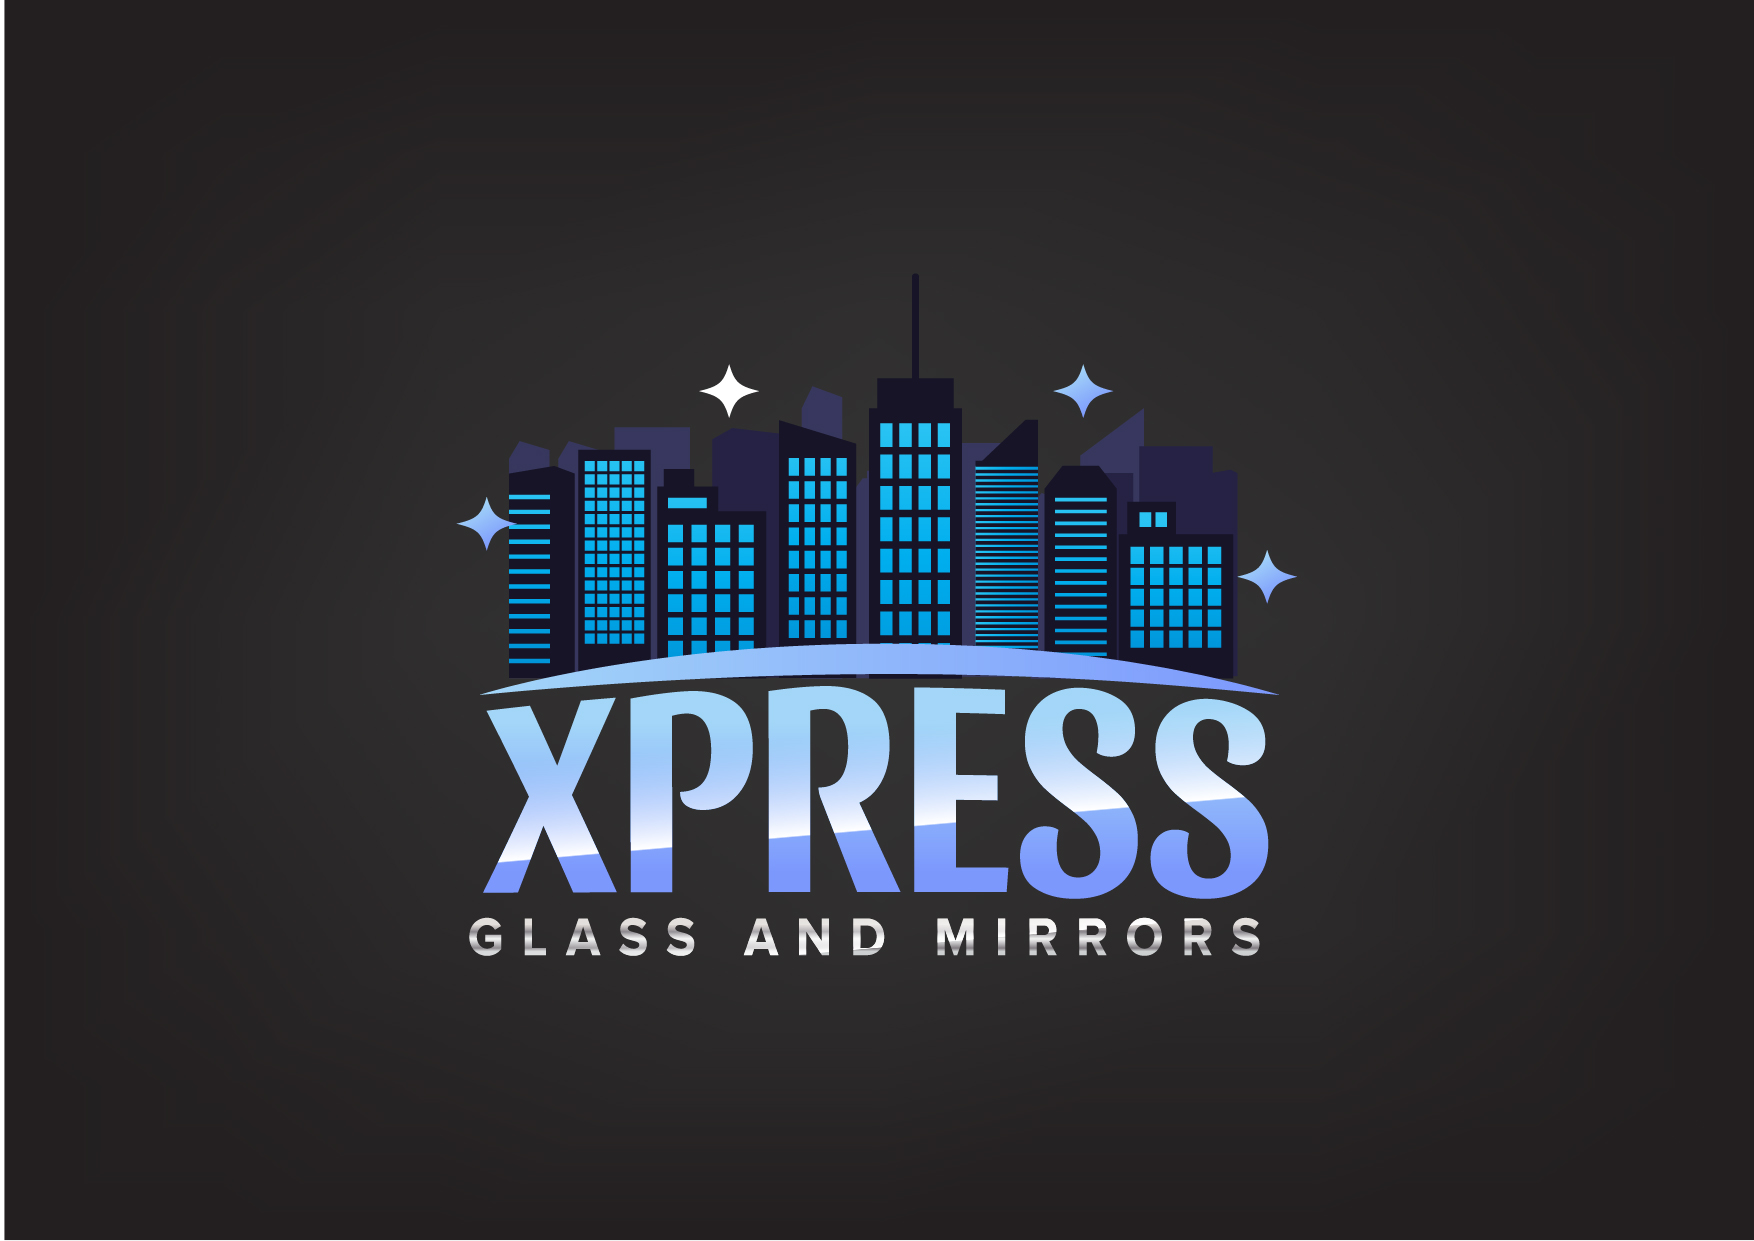 Xpress Glass and Mirrors Logo